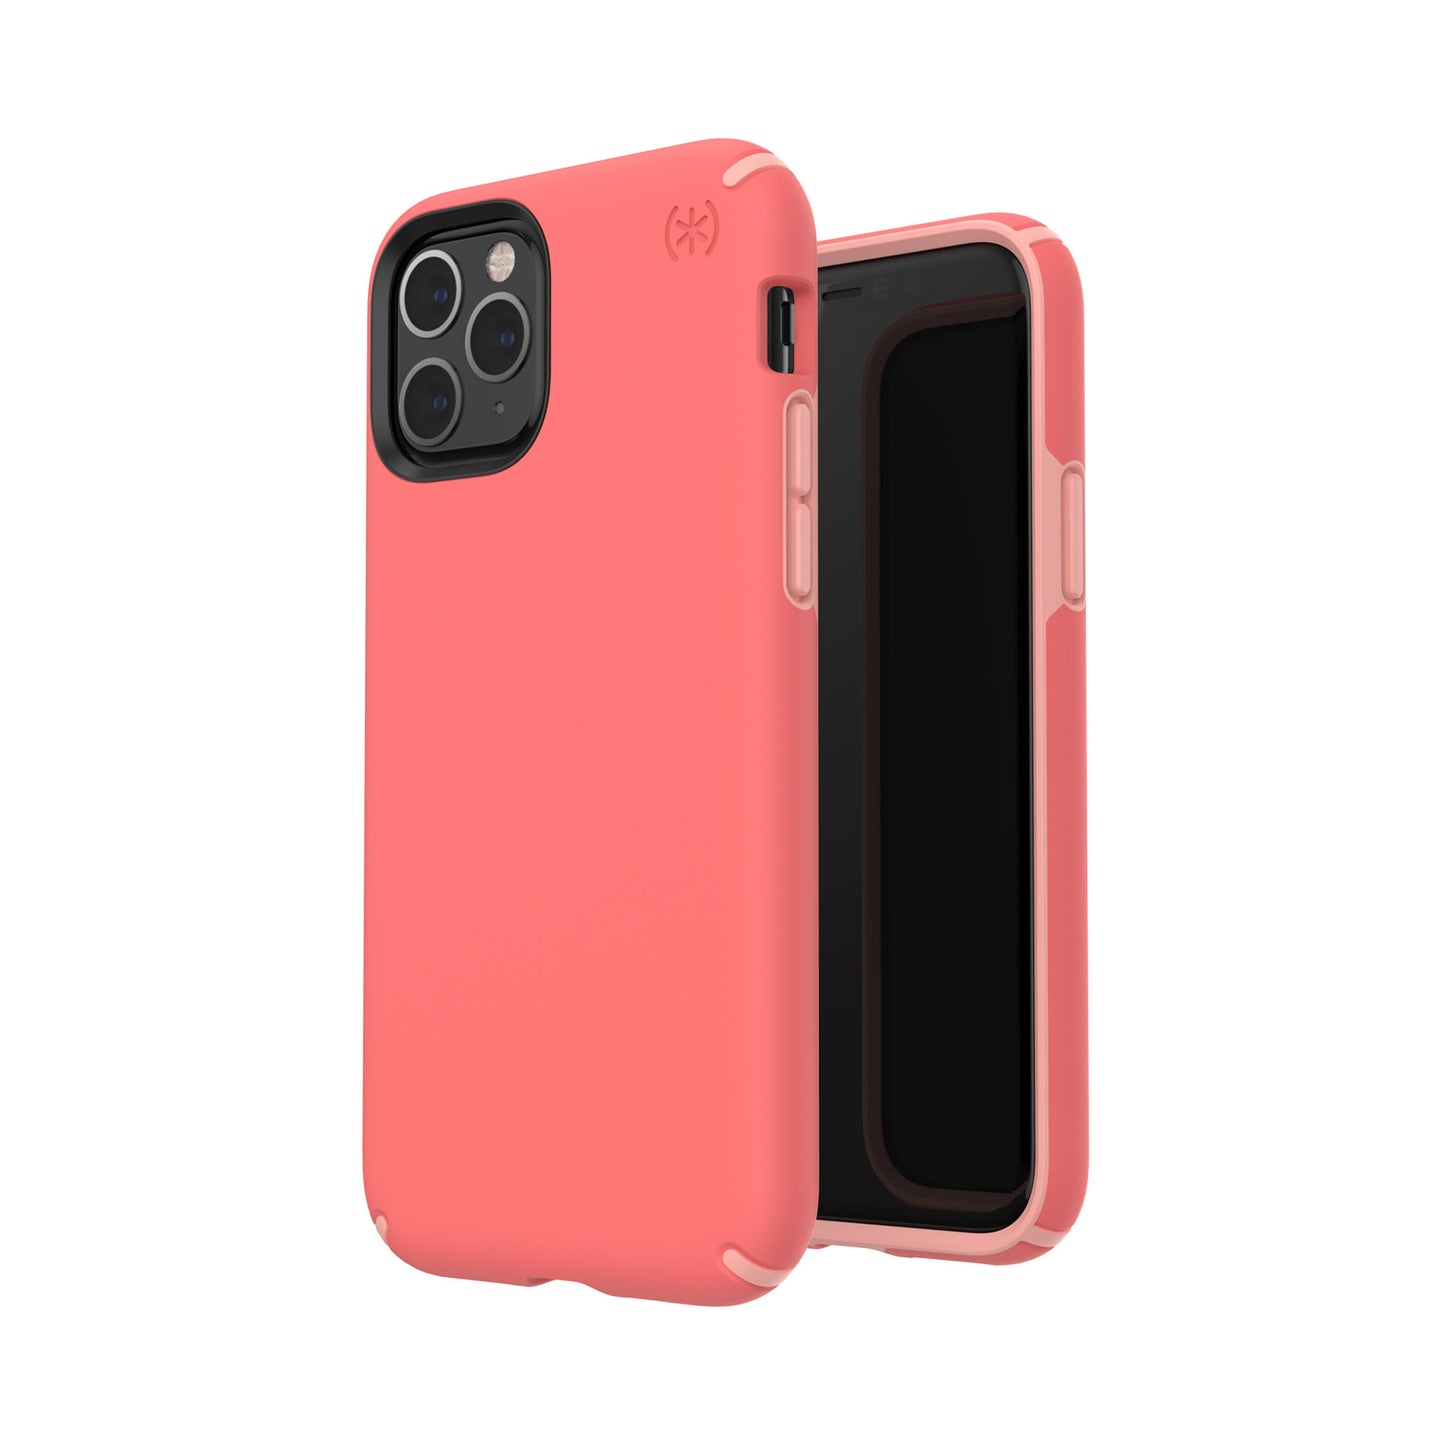 SPECK Presidio Pro Case for iPhone 11 Pro Max - Parrot Pink/Chiffon Pink